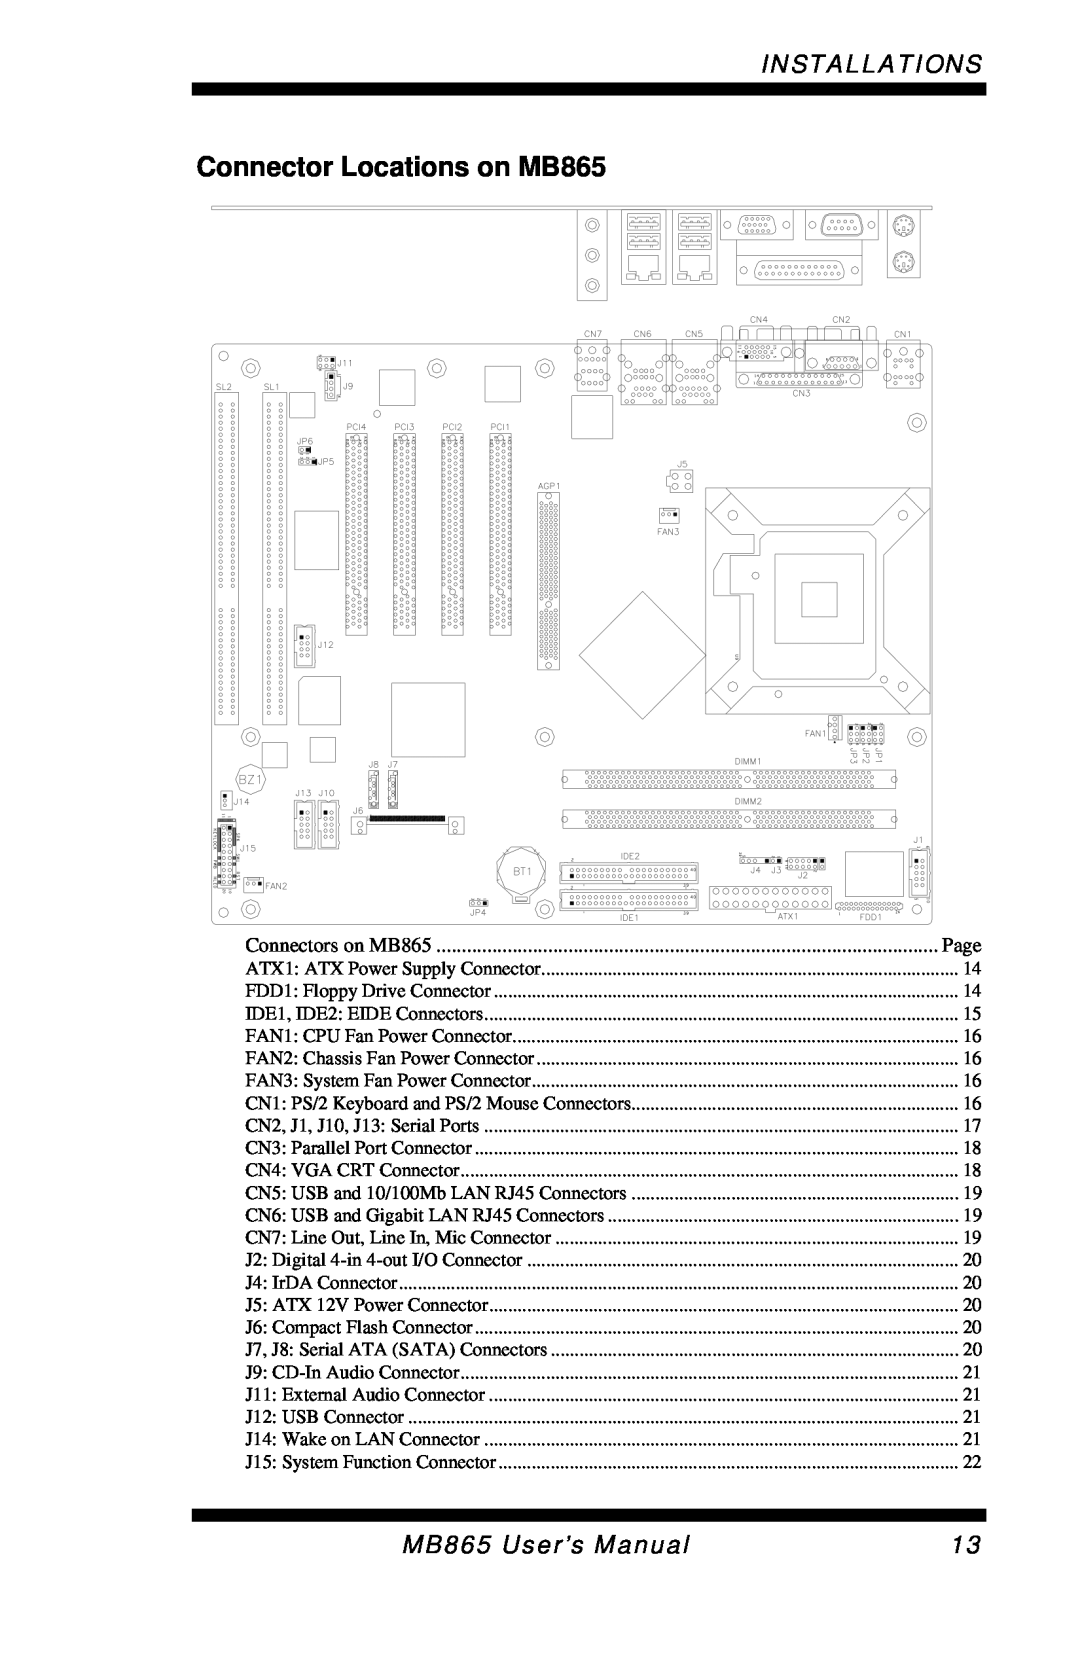 Intel user manual Connector Locations on MB865, Installations 